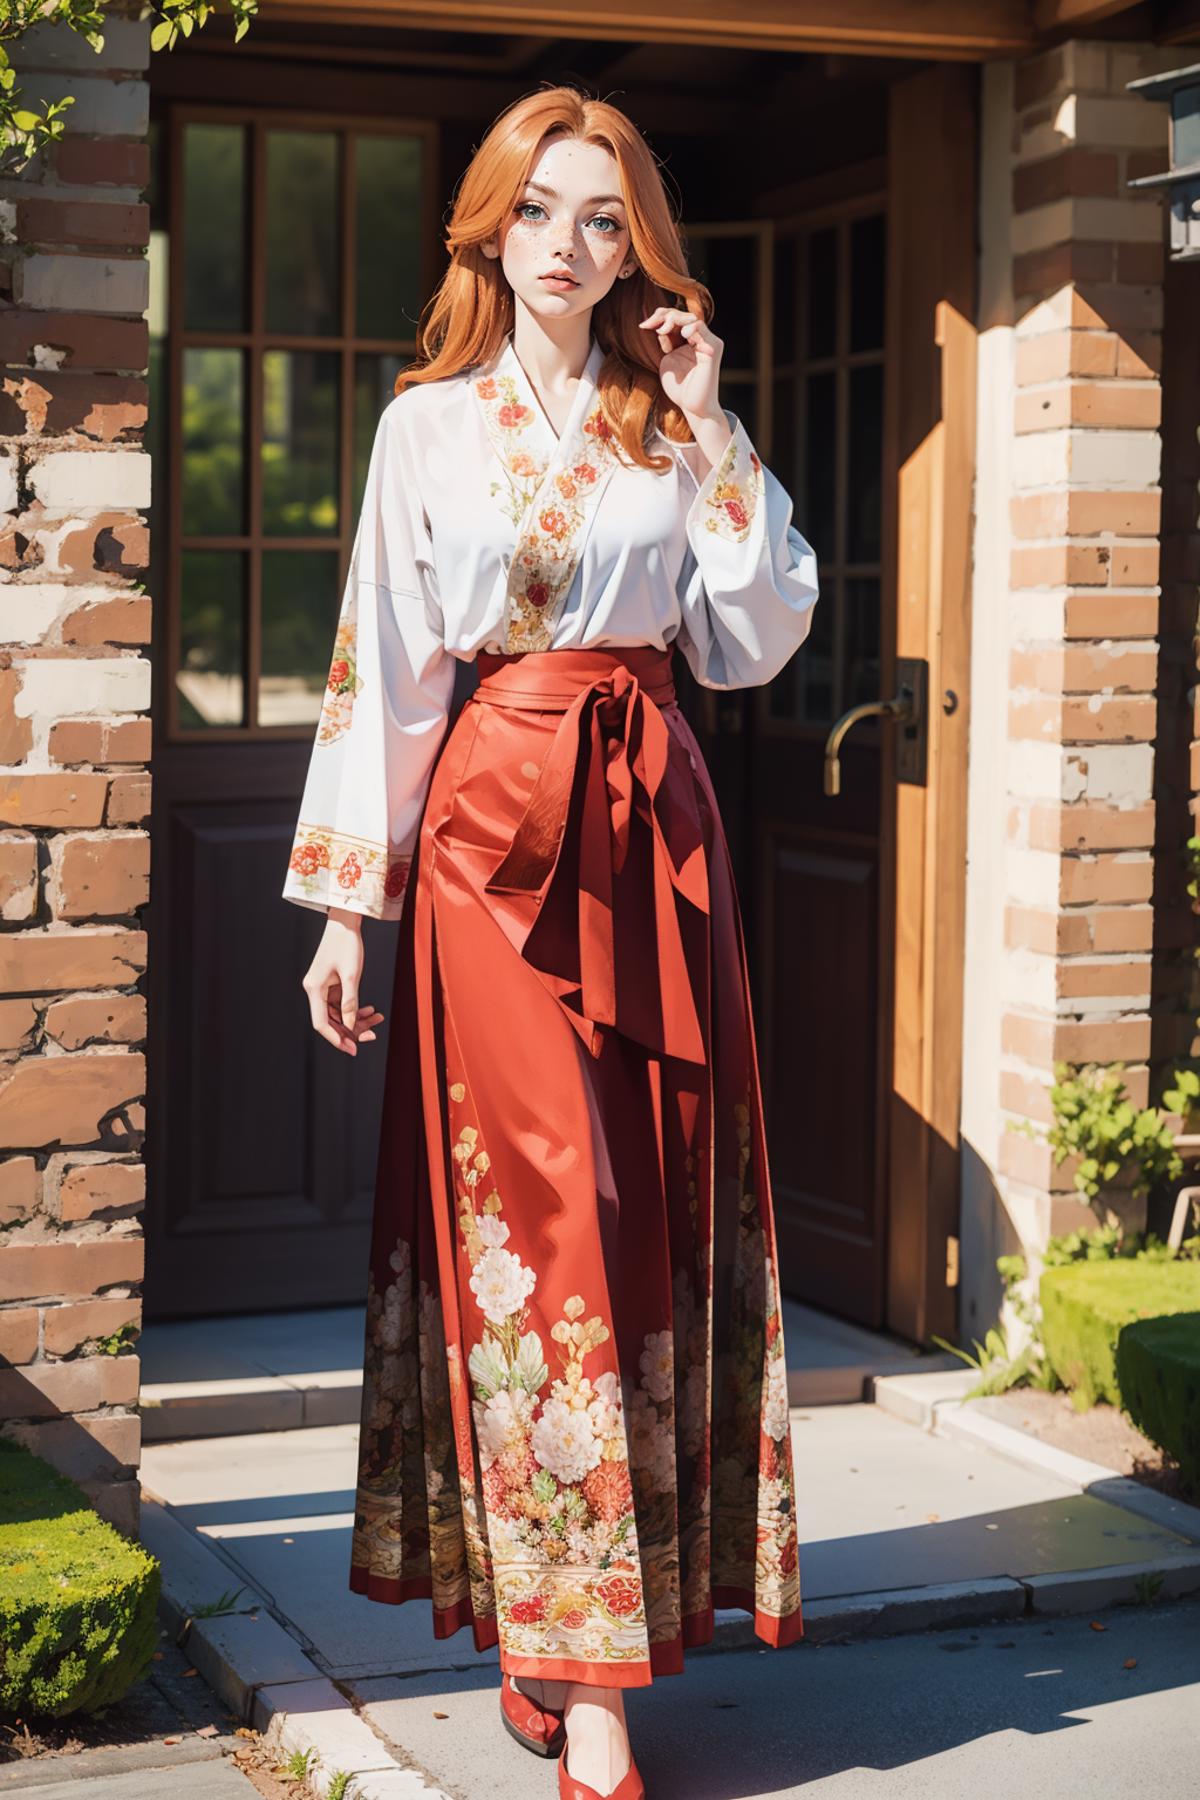 Autumn Ming & Horse Face Skirt image by freckledvixon